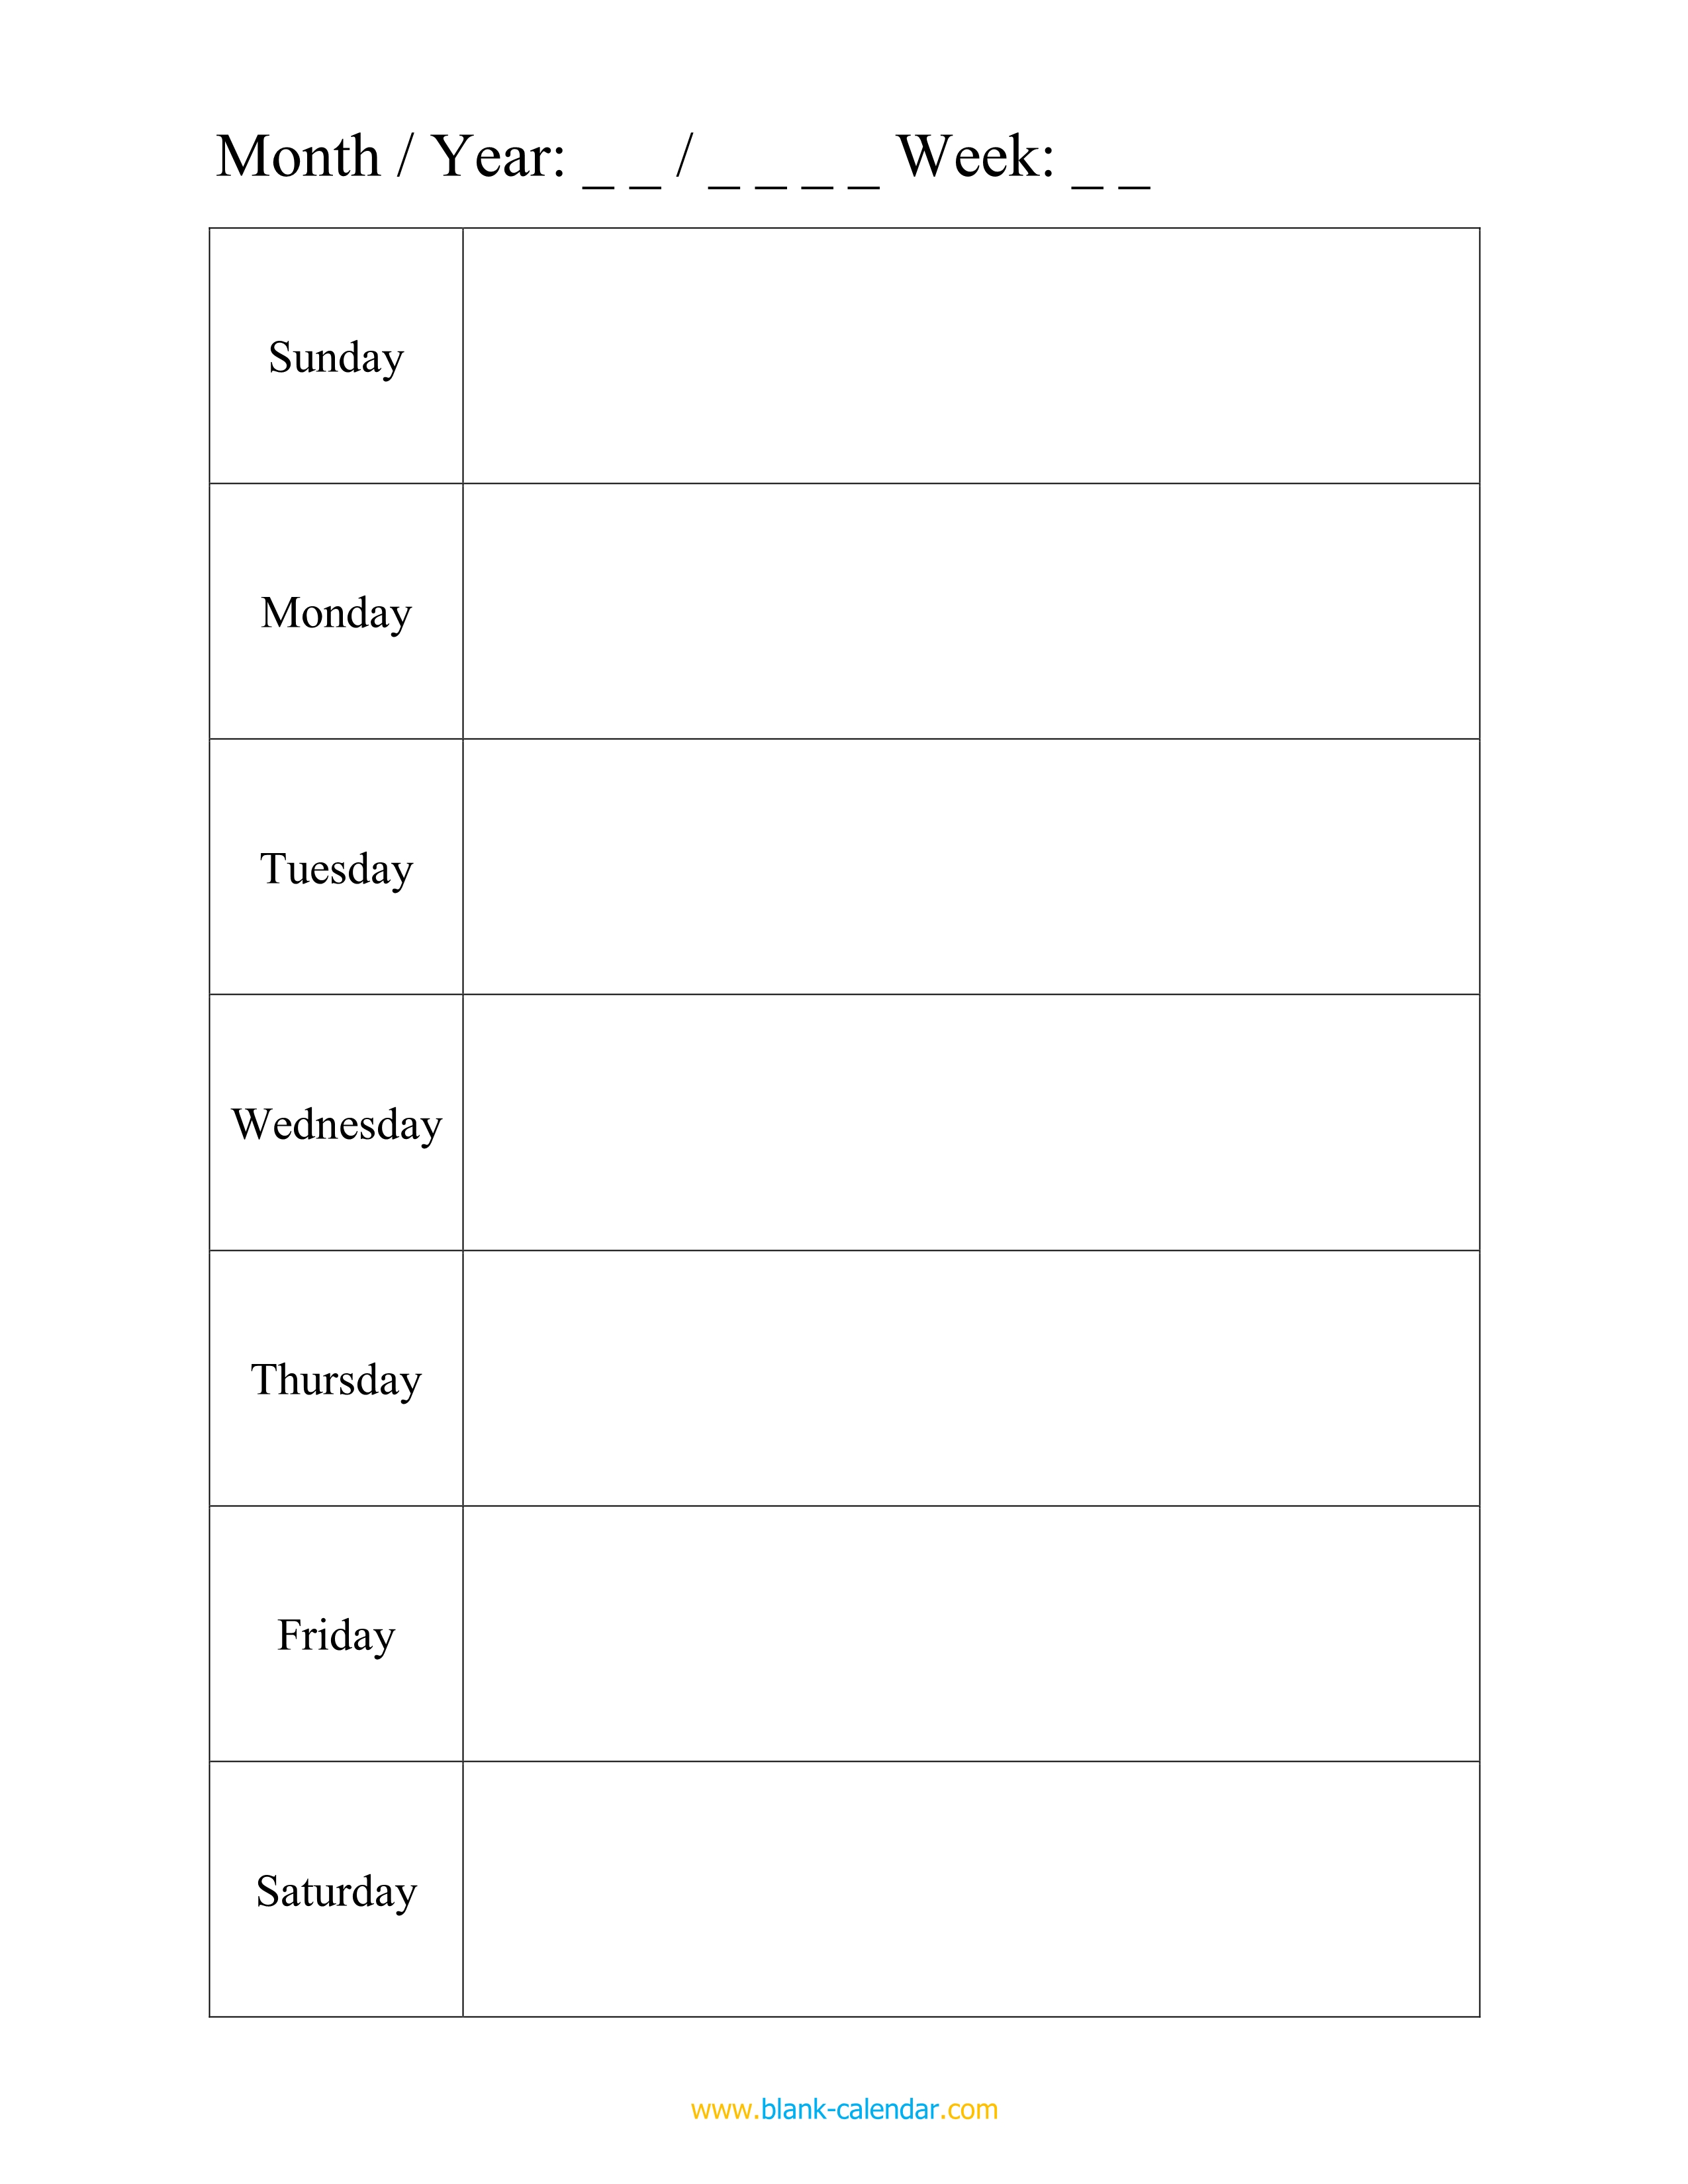 downloadable-weekly-schedule-template-database